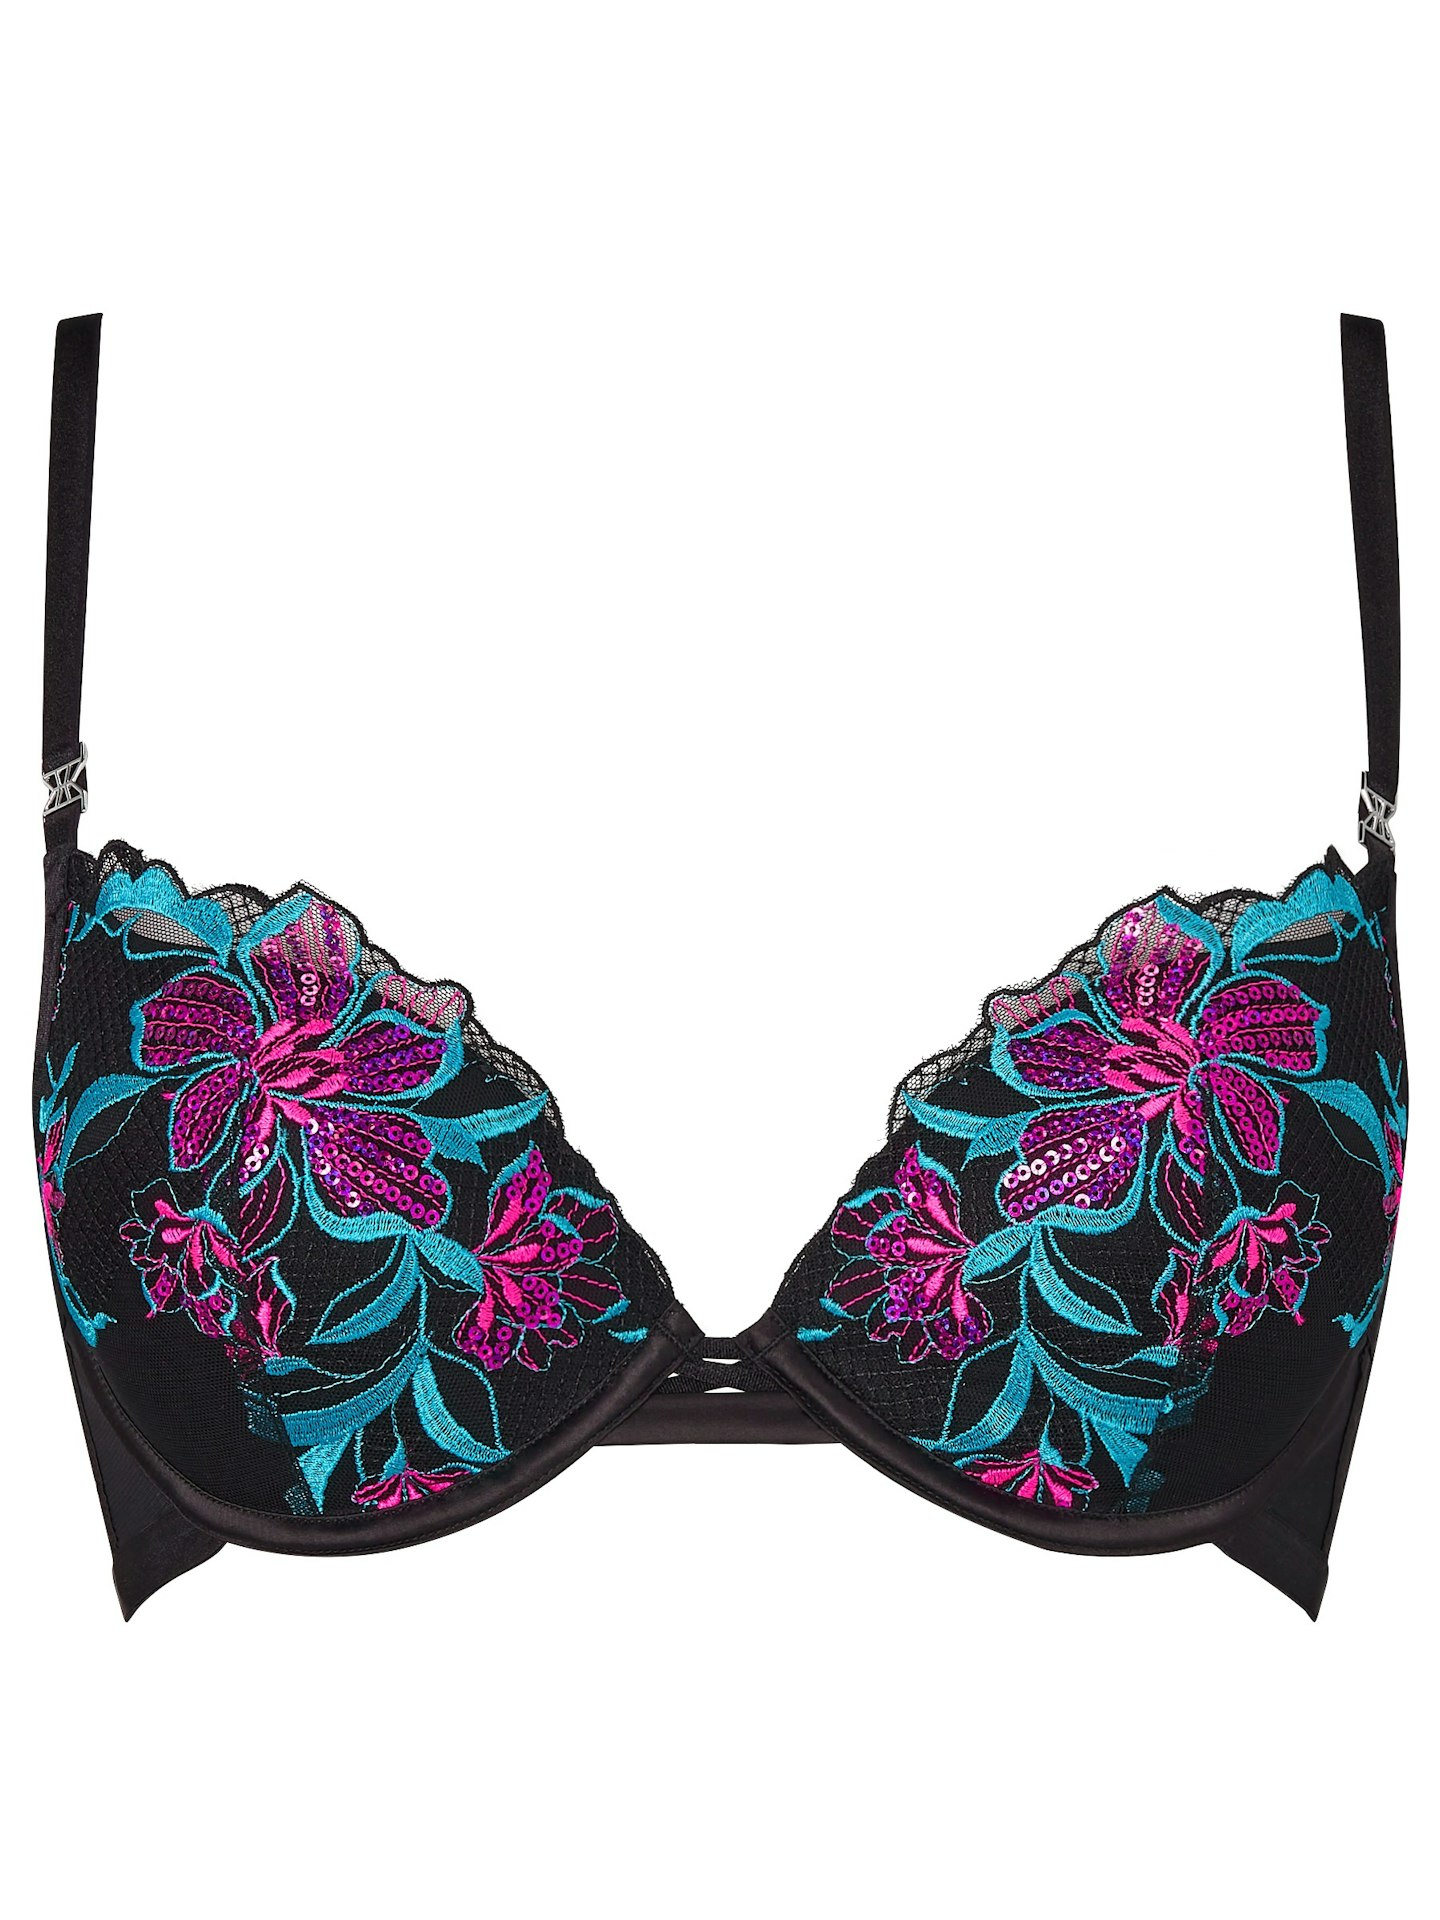 Ann Summer black bra with blue and pink floral sequin embroidery